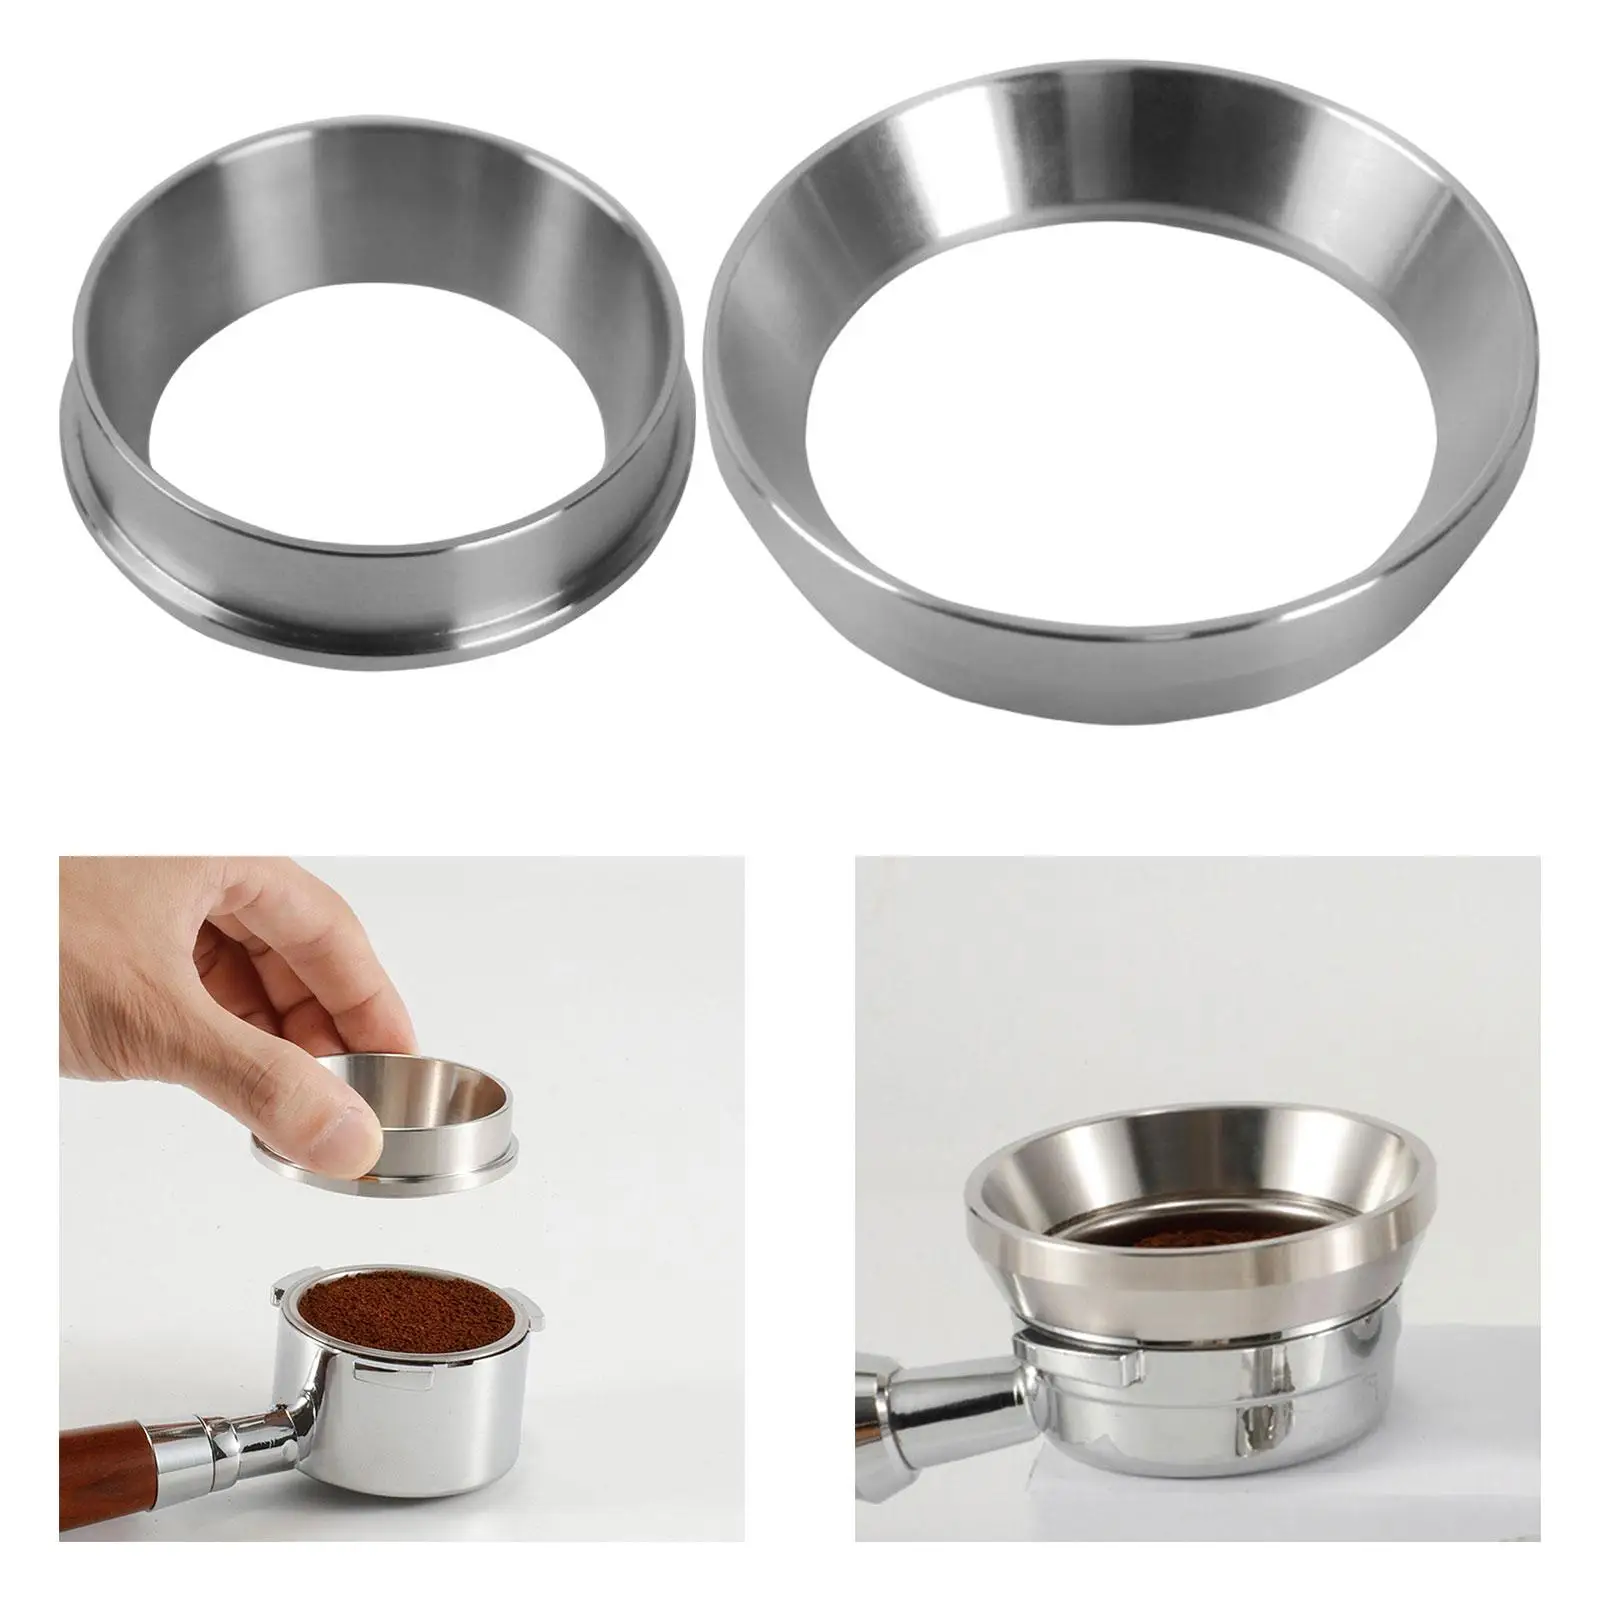 Espresso Dosings Funnel Stainless Steel Coffee Maker Accessory Lightweight Easily Install